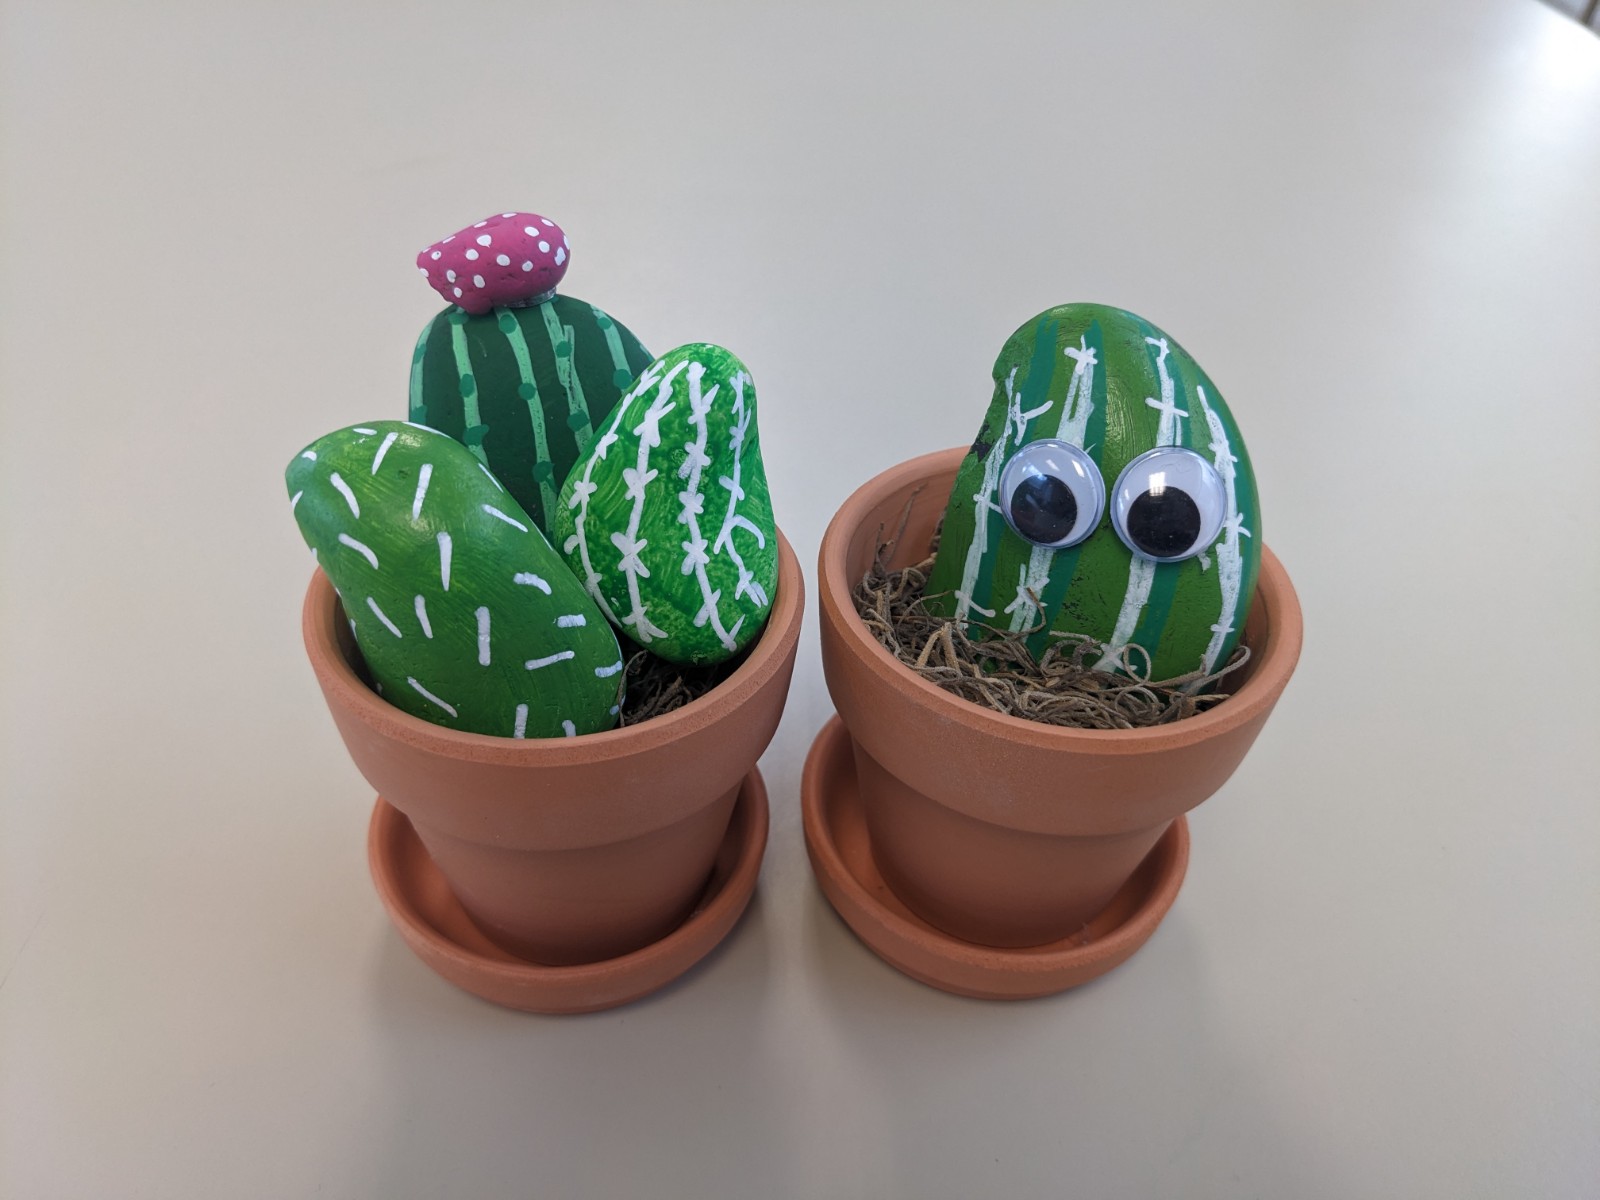 one clay pot with 3 painted rocks to look like cactus and a second pot with a cactus with googly eyes